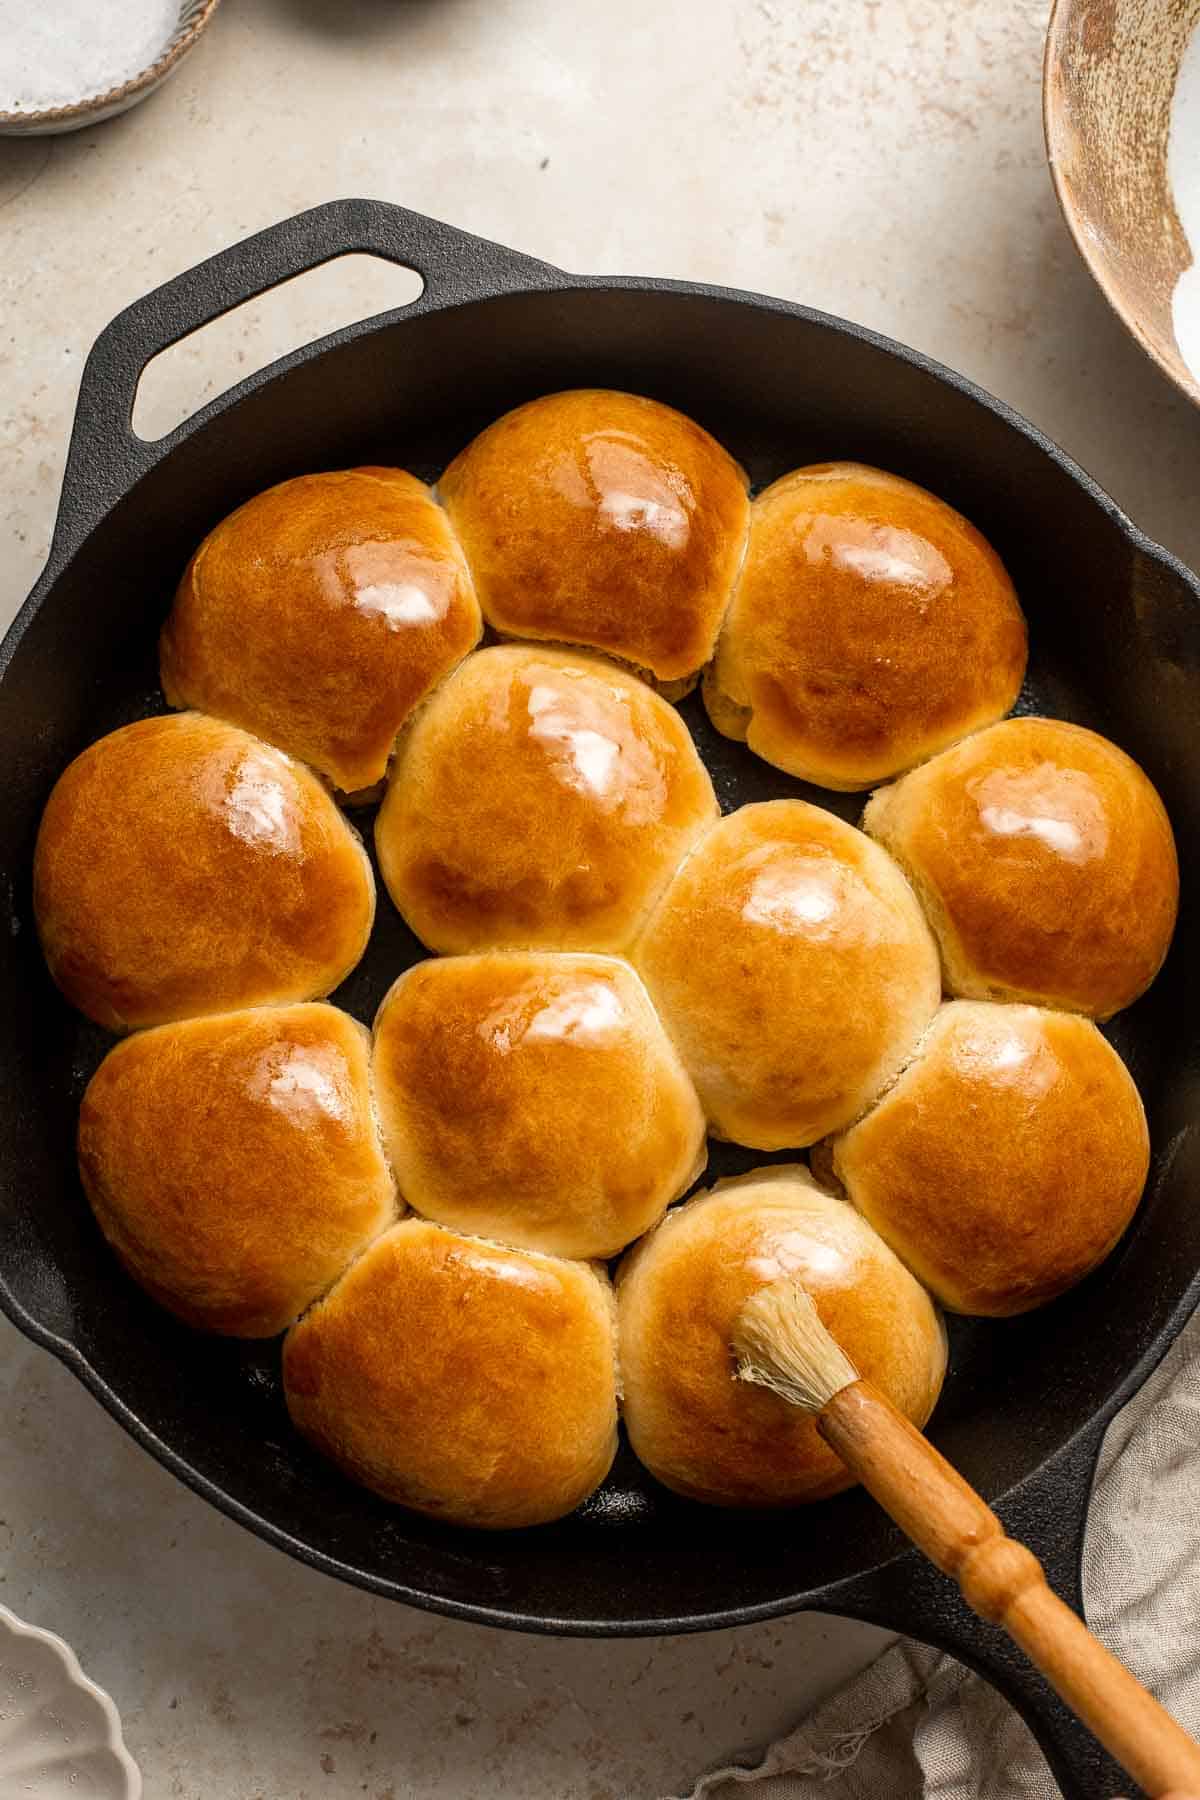 Quick and Easy Skillet Dinner Rolls are soft, fluffy, and served warm right out of the oven making them the only bread recipe you’ll need with dinner. | aheadofthyme.com